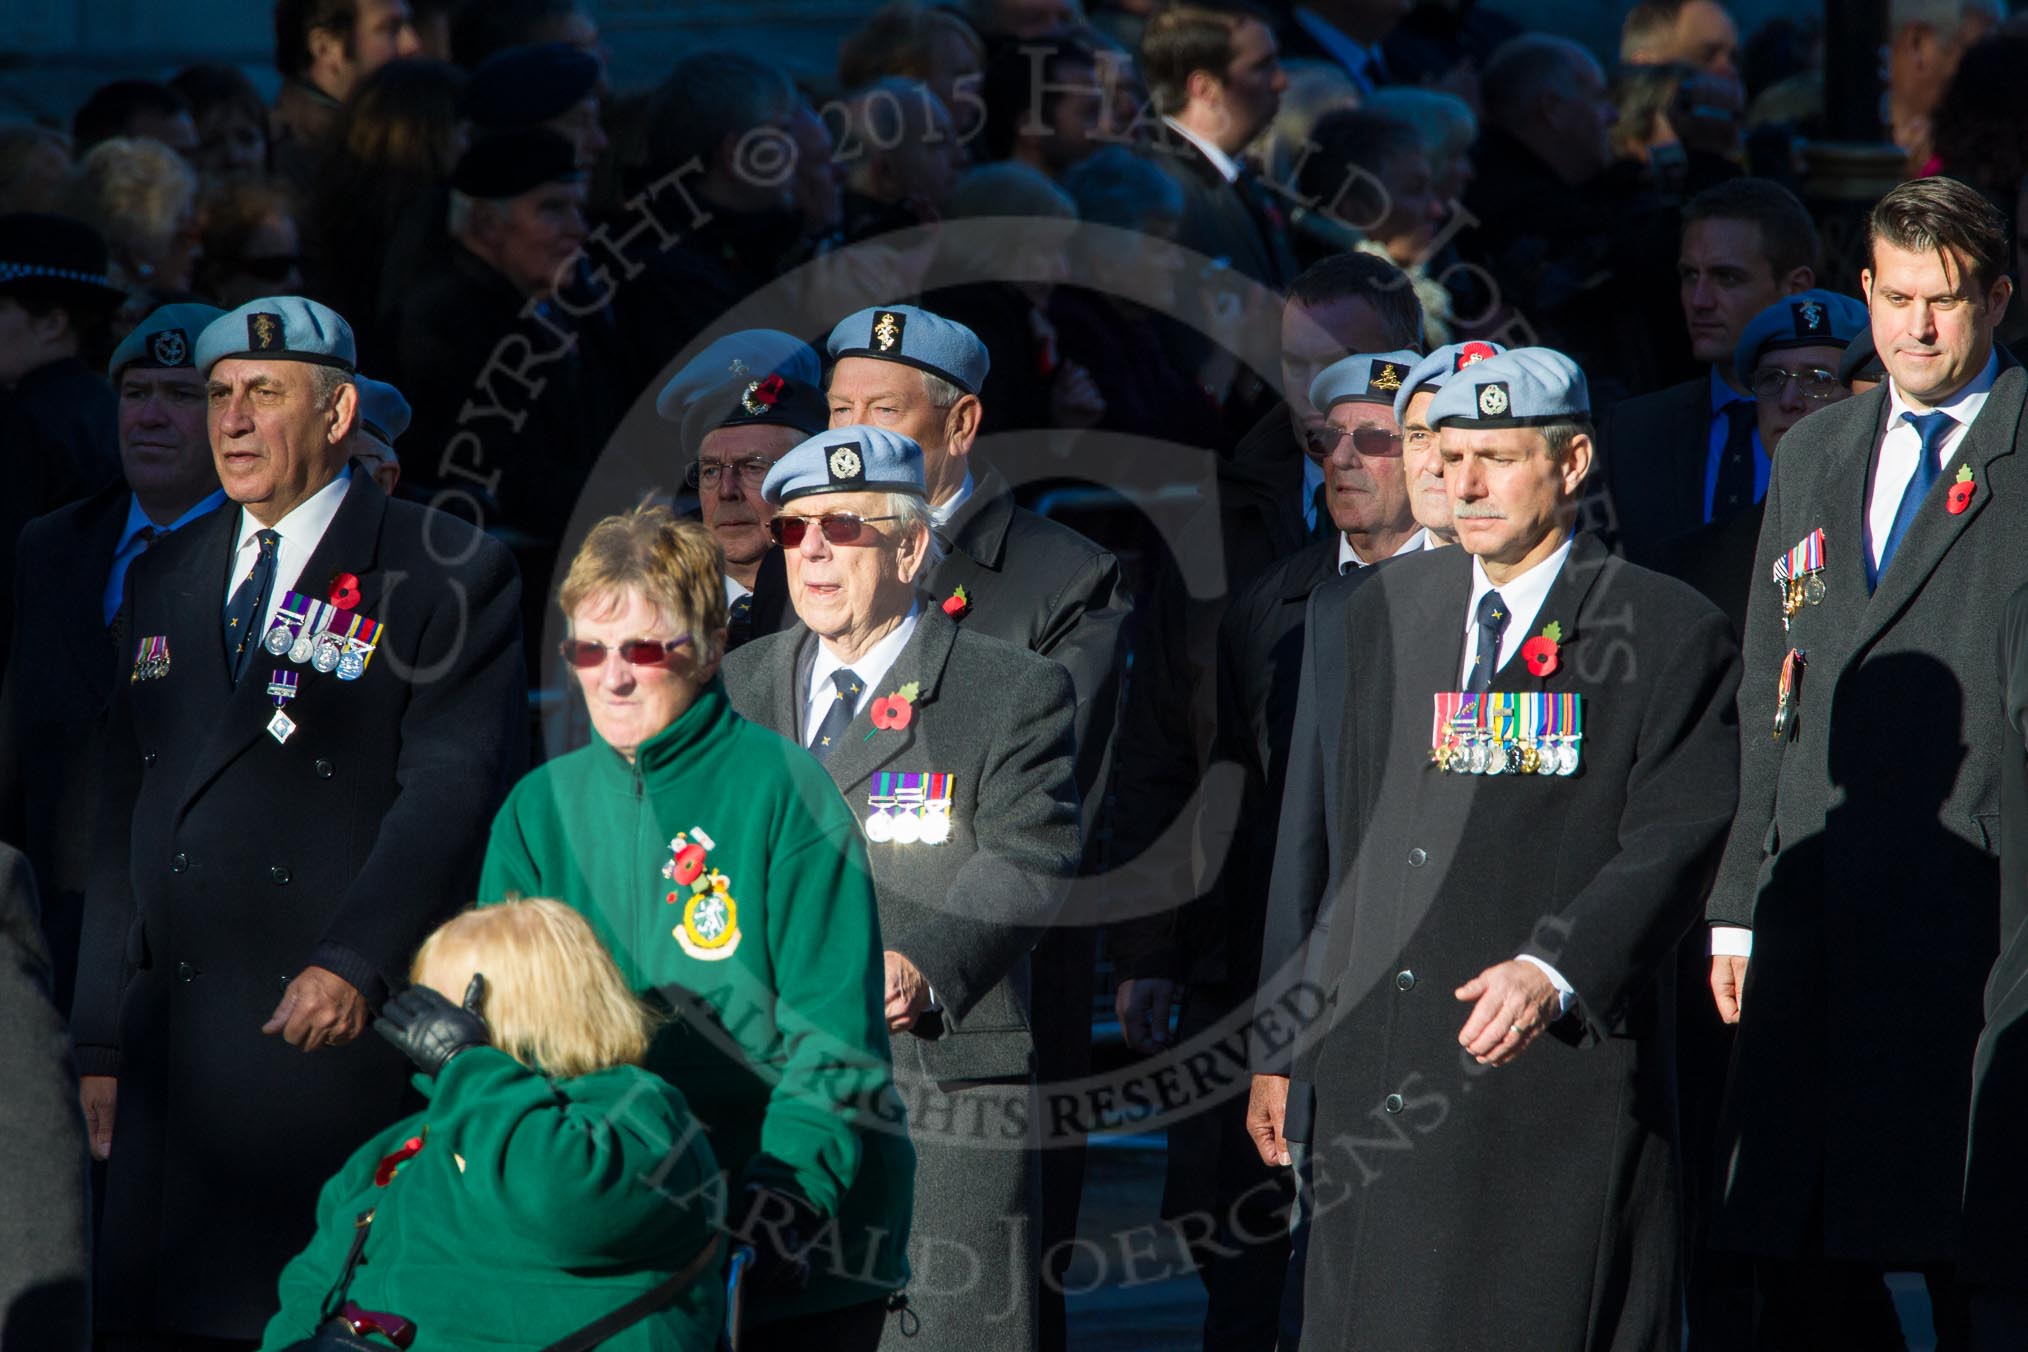 Remembrance Sunday Cenotaph March Past 2013: B16 - 656 Squadron Association..
Press stand opposite the Foreign Office building, Whitehall, London SW1,
London,
Greater London,
United Kingdom,
on 10 November 2013 at 12:01, image #1422